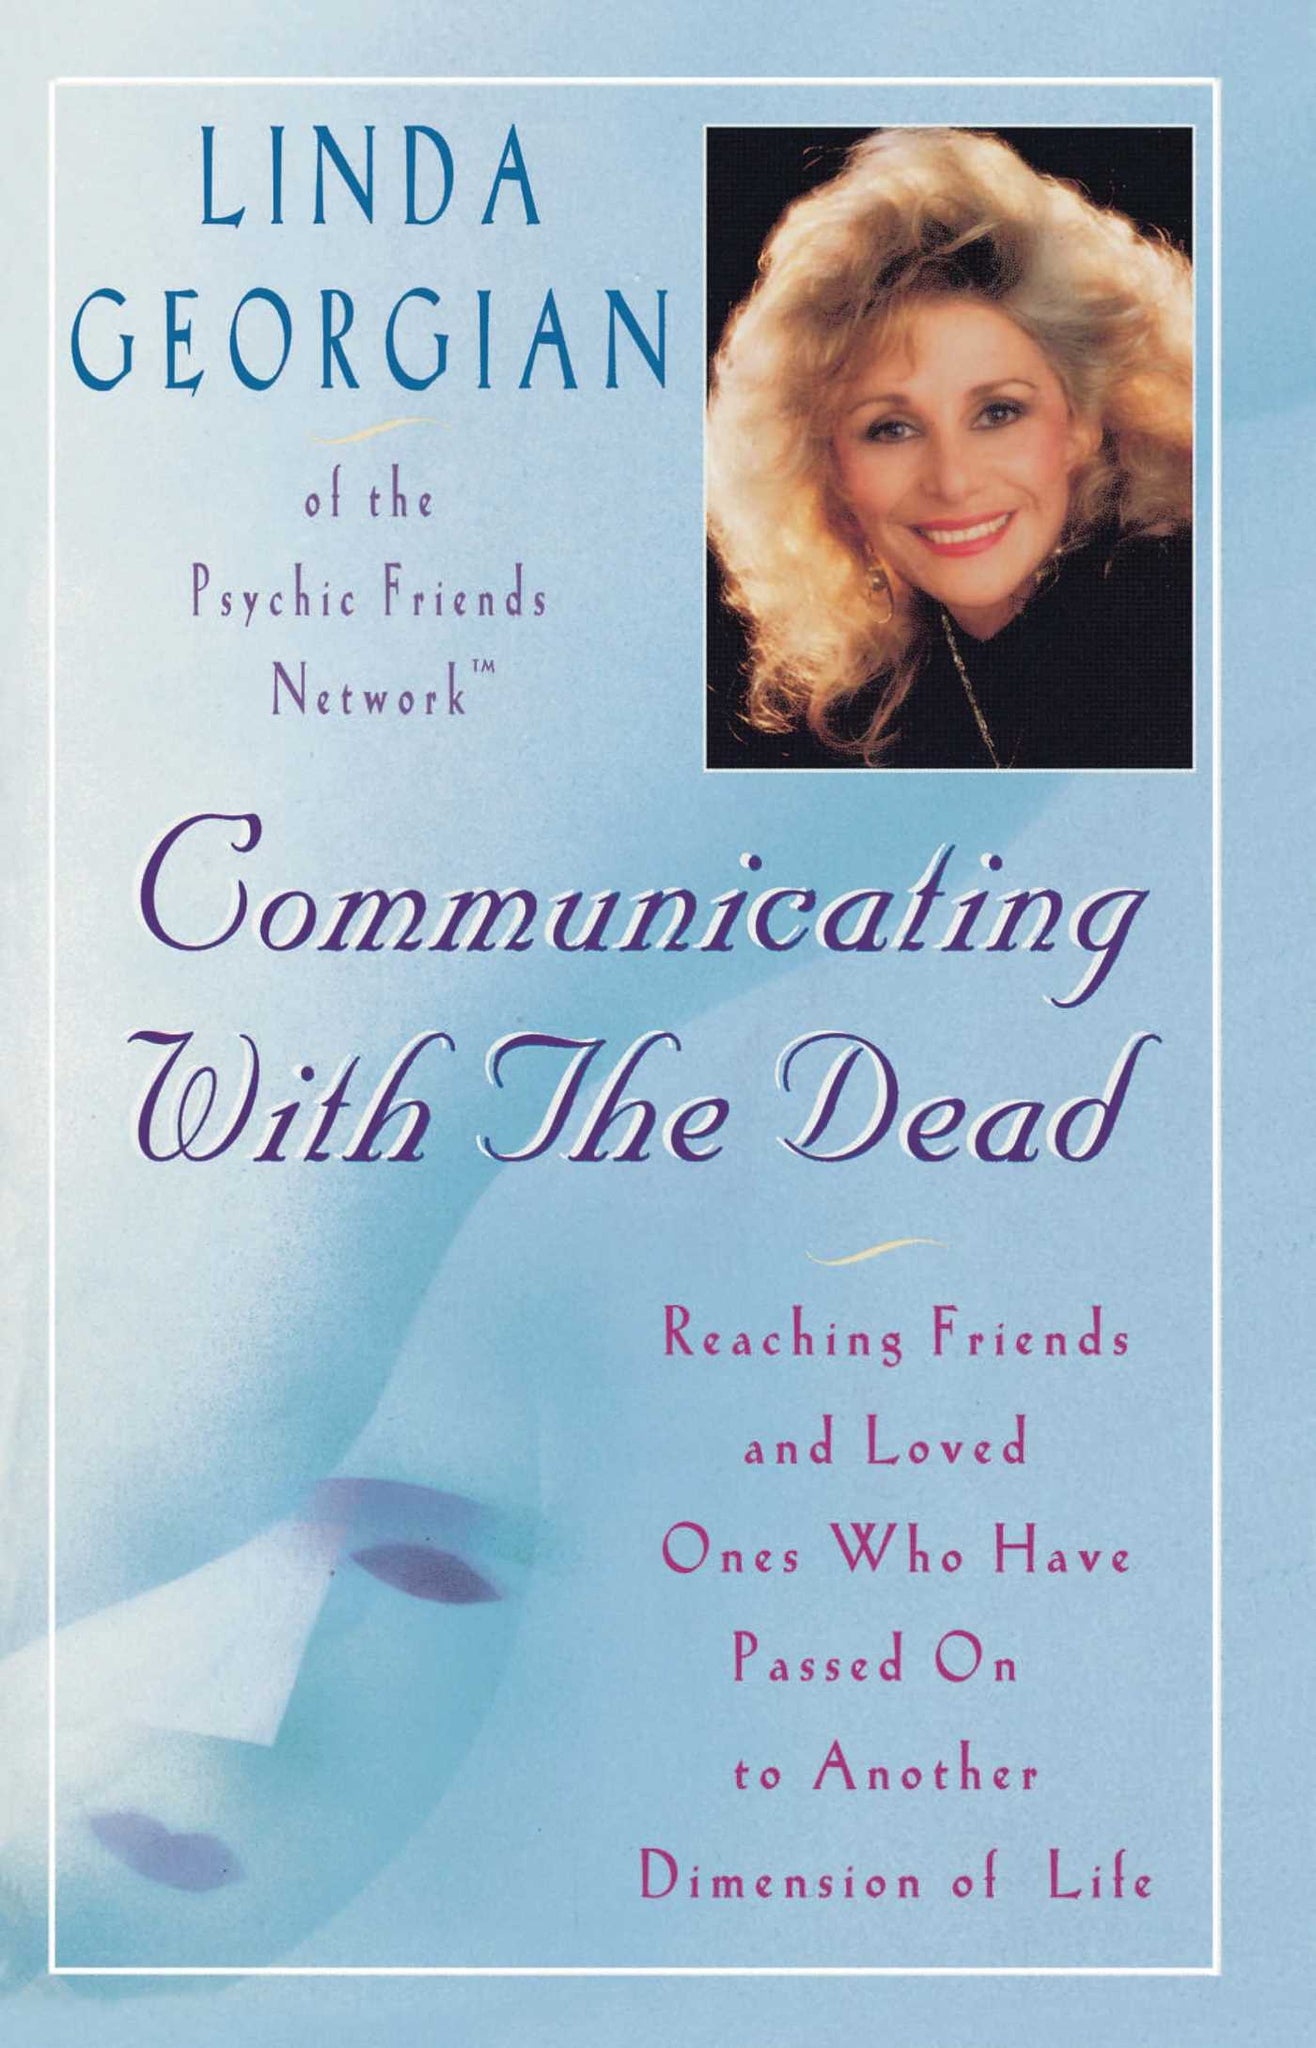 Communicating with the Dead : Reaching Friends and Loved Ones Who Haved Passed On to Another Dimension of Life